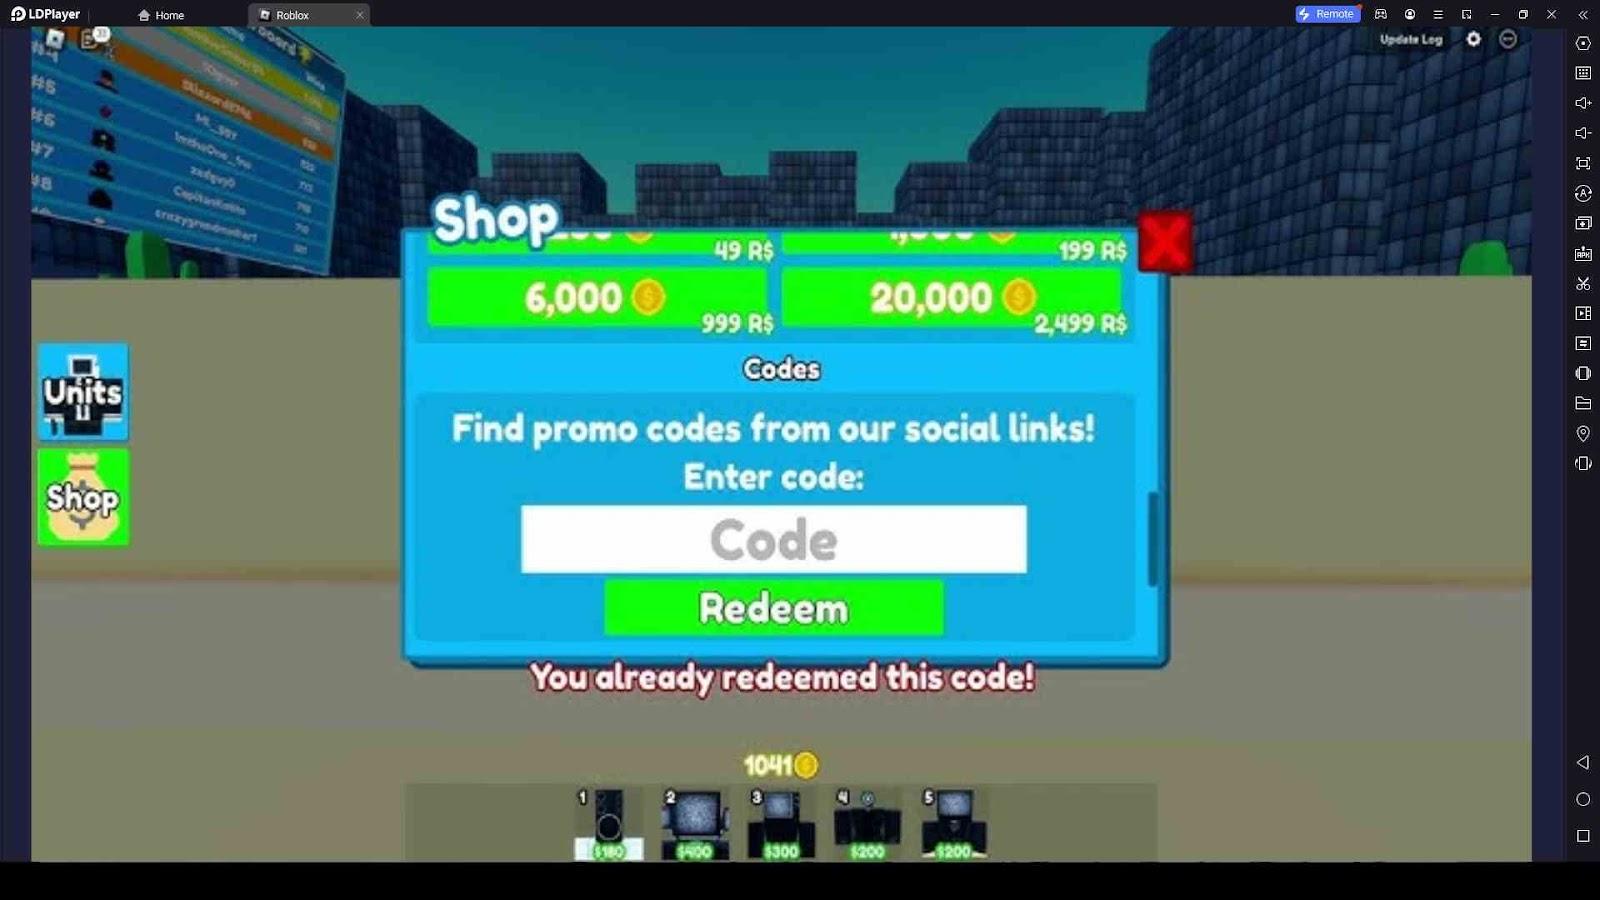 NEW* ALL WORKING CODES FOR TOILET TOWER DEFENSE IN 2023! ROBLOX TOILET TOWER  DEFENSE CODES 